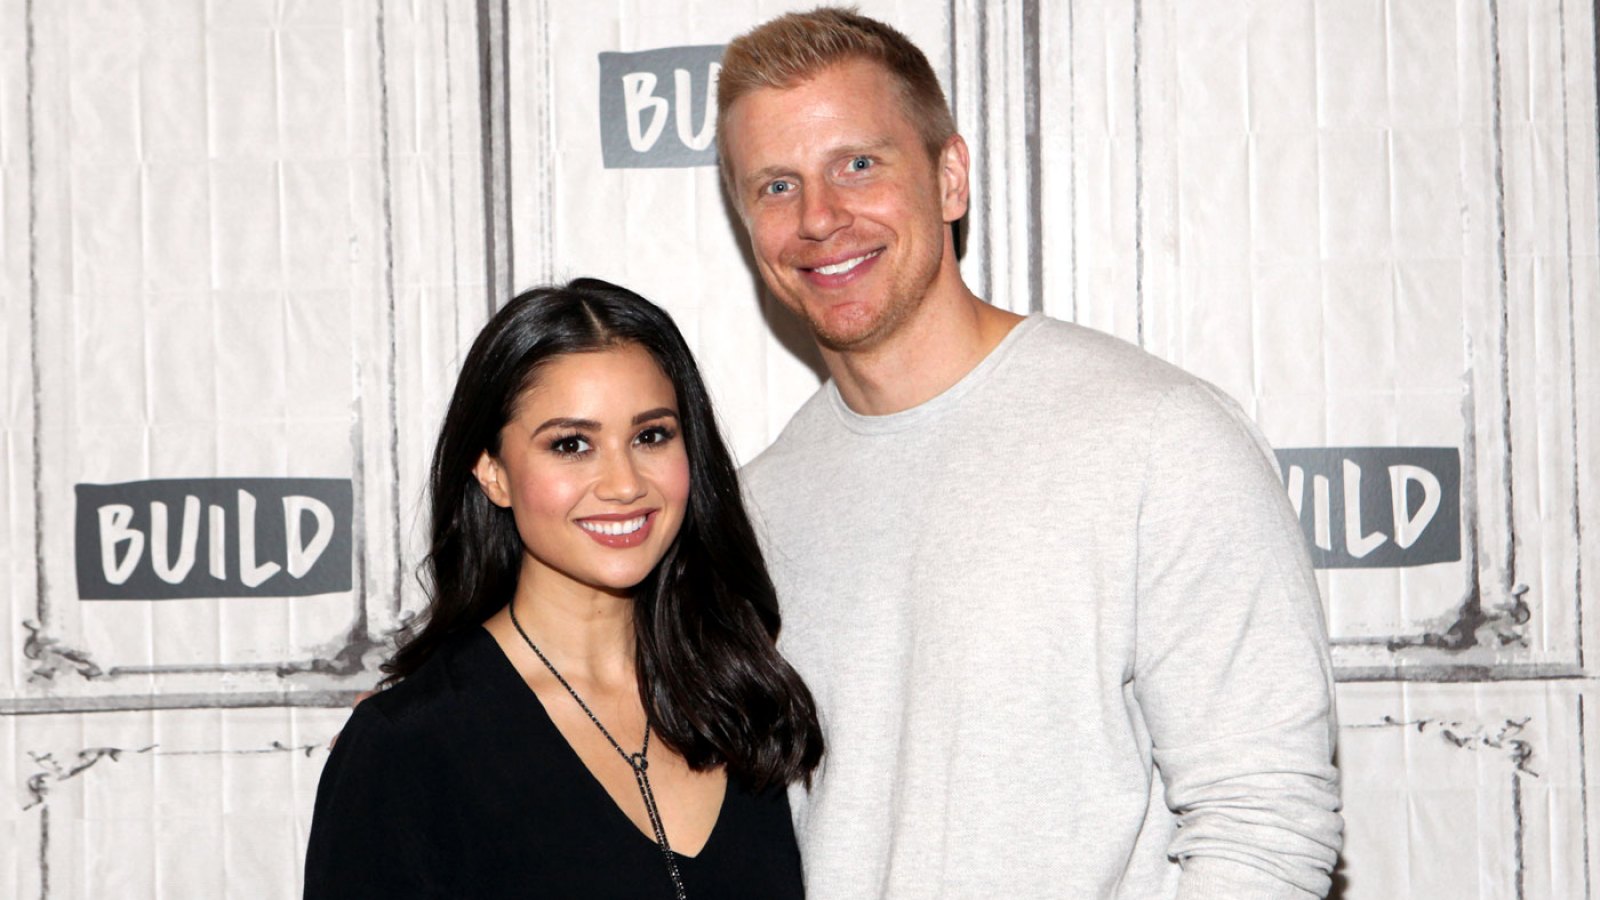 Catherine Giudici Shows Off Baby Bump 1 Week After Pregnancy Announcement Sean Lowe Build Series